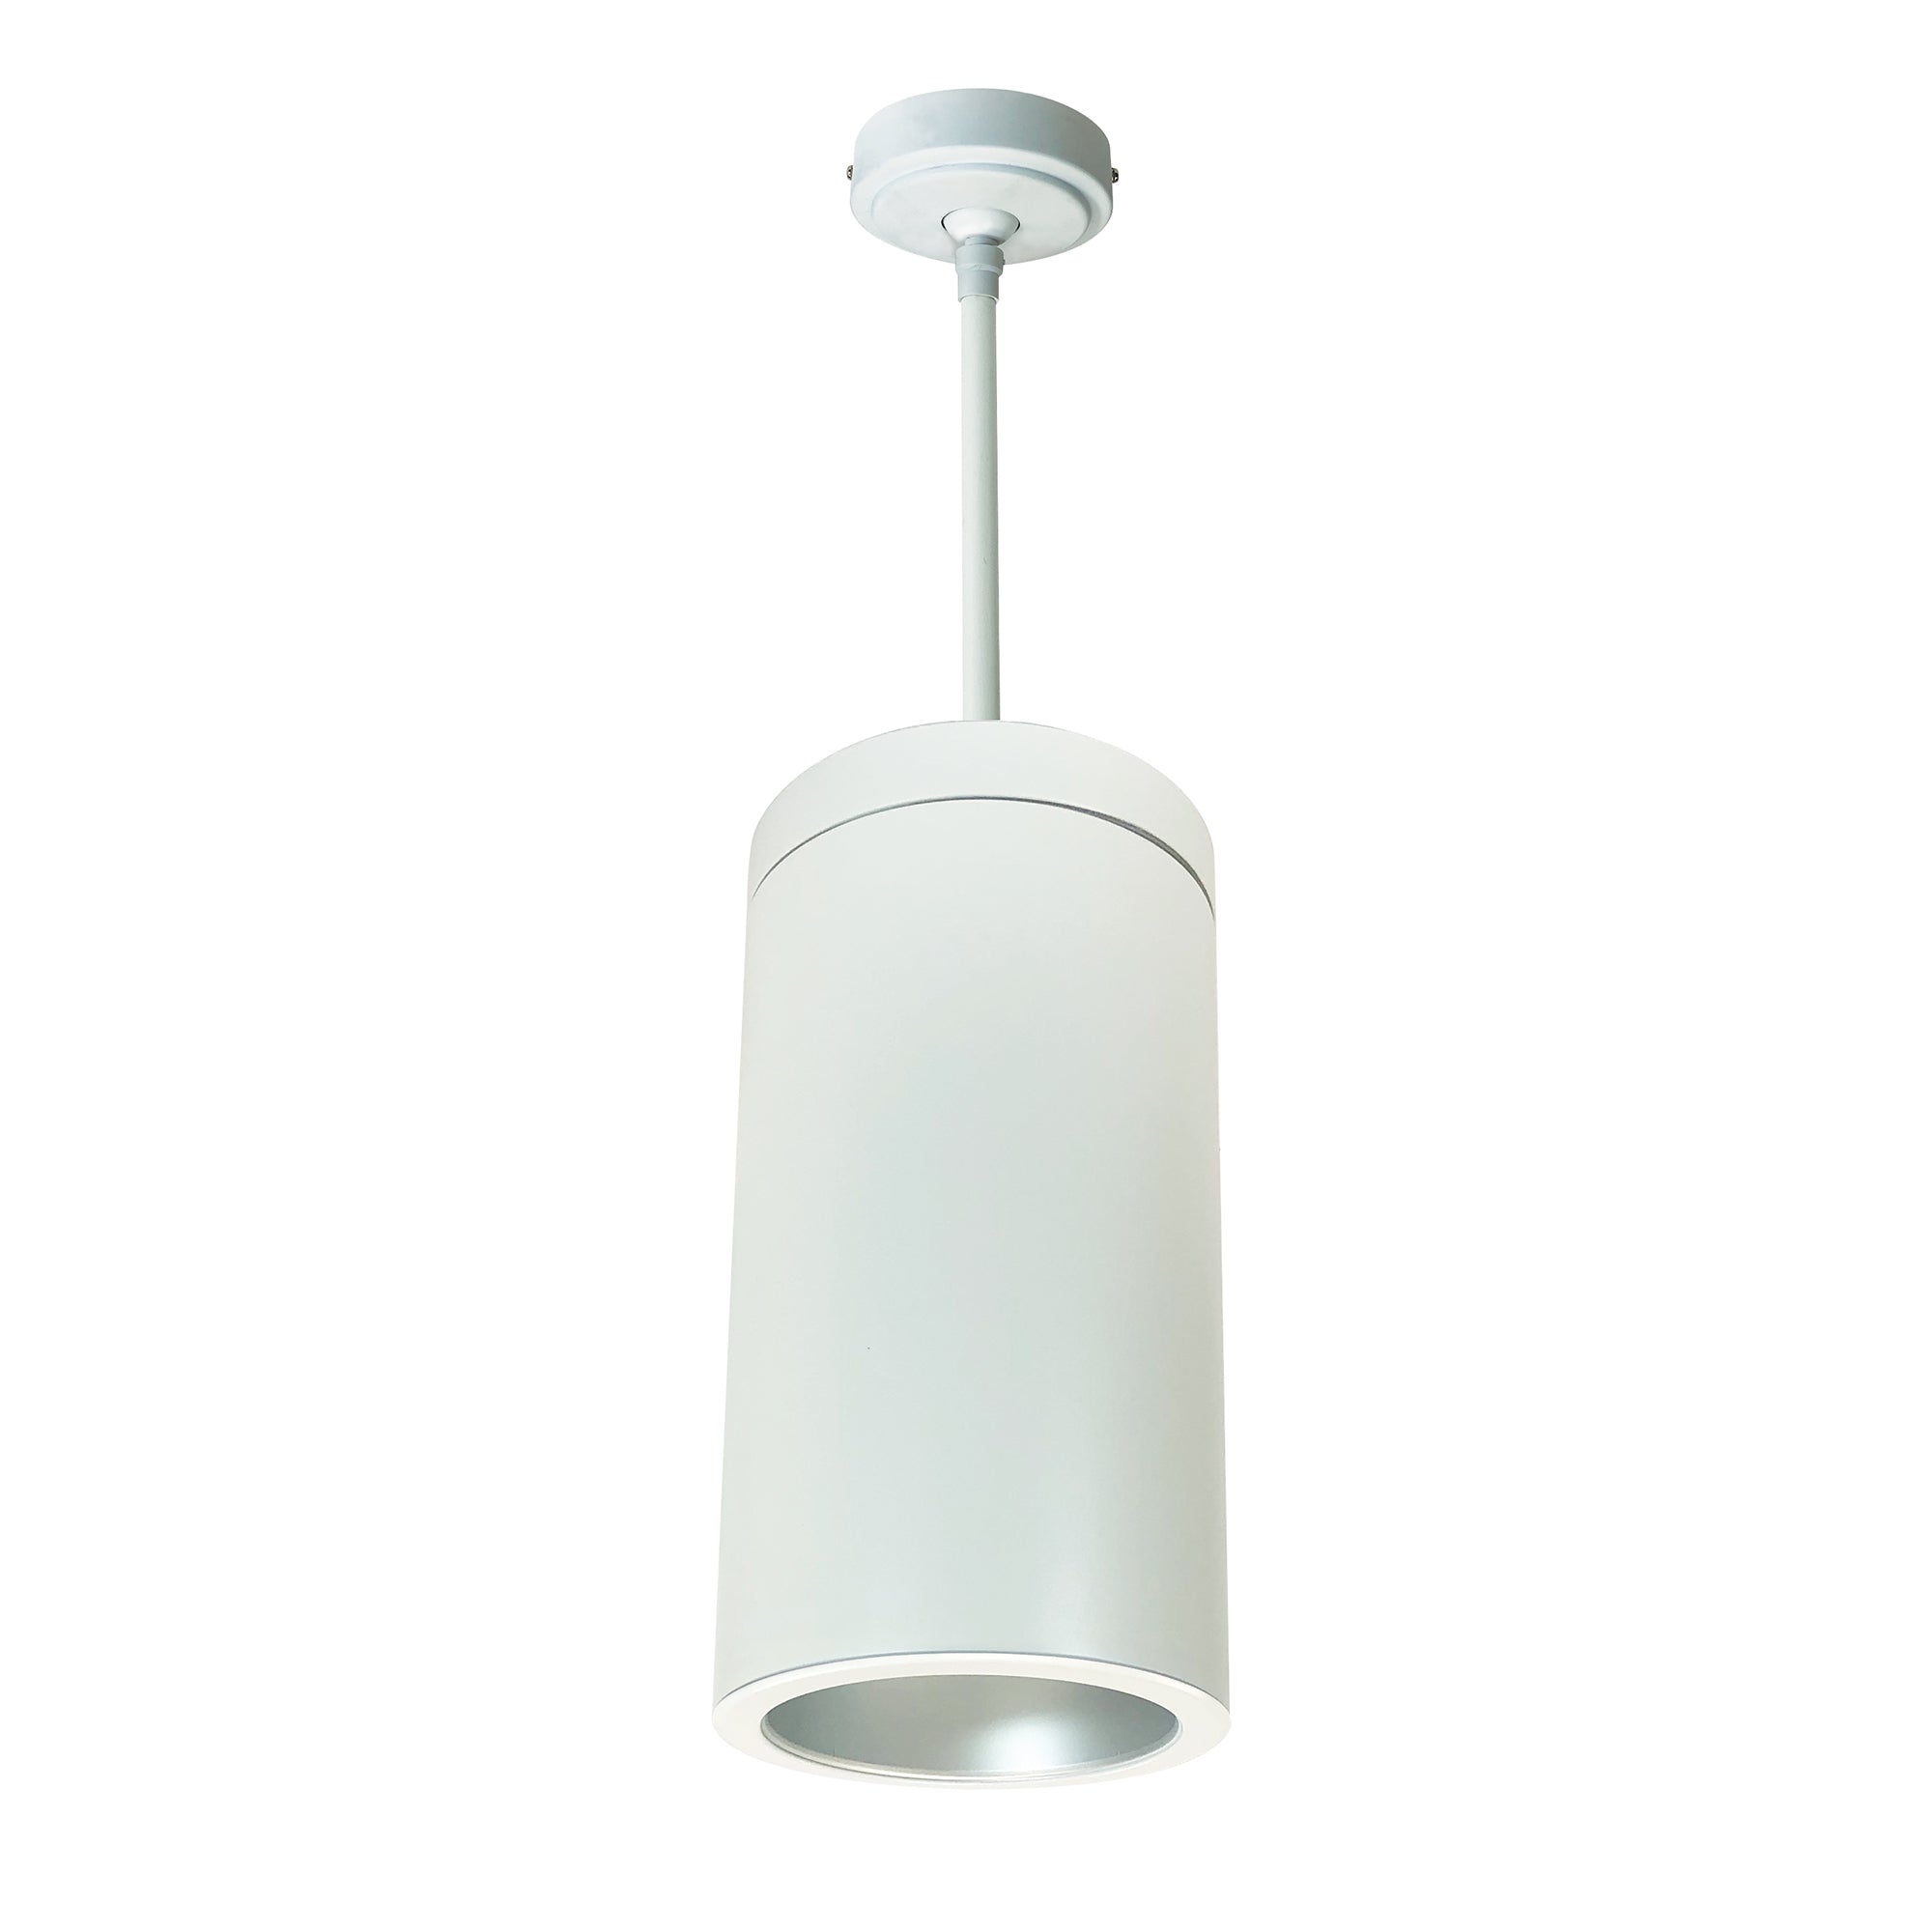 Nora Lighting LE45 - NYLS2-6P25140MHWW3 - Cylinder - White